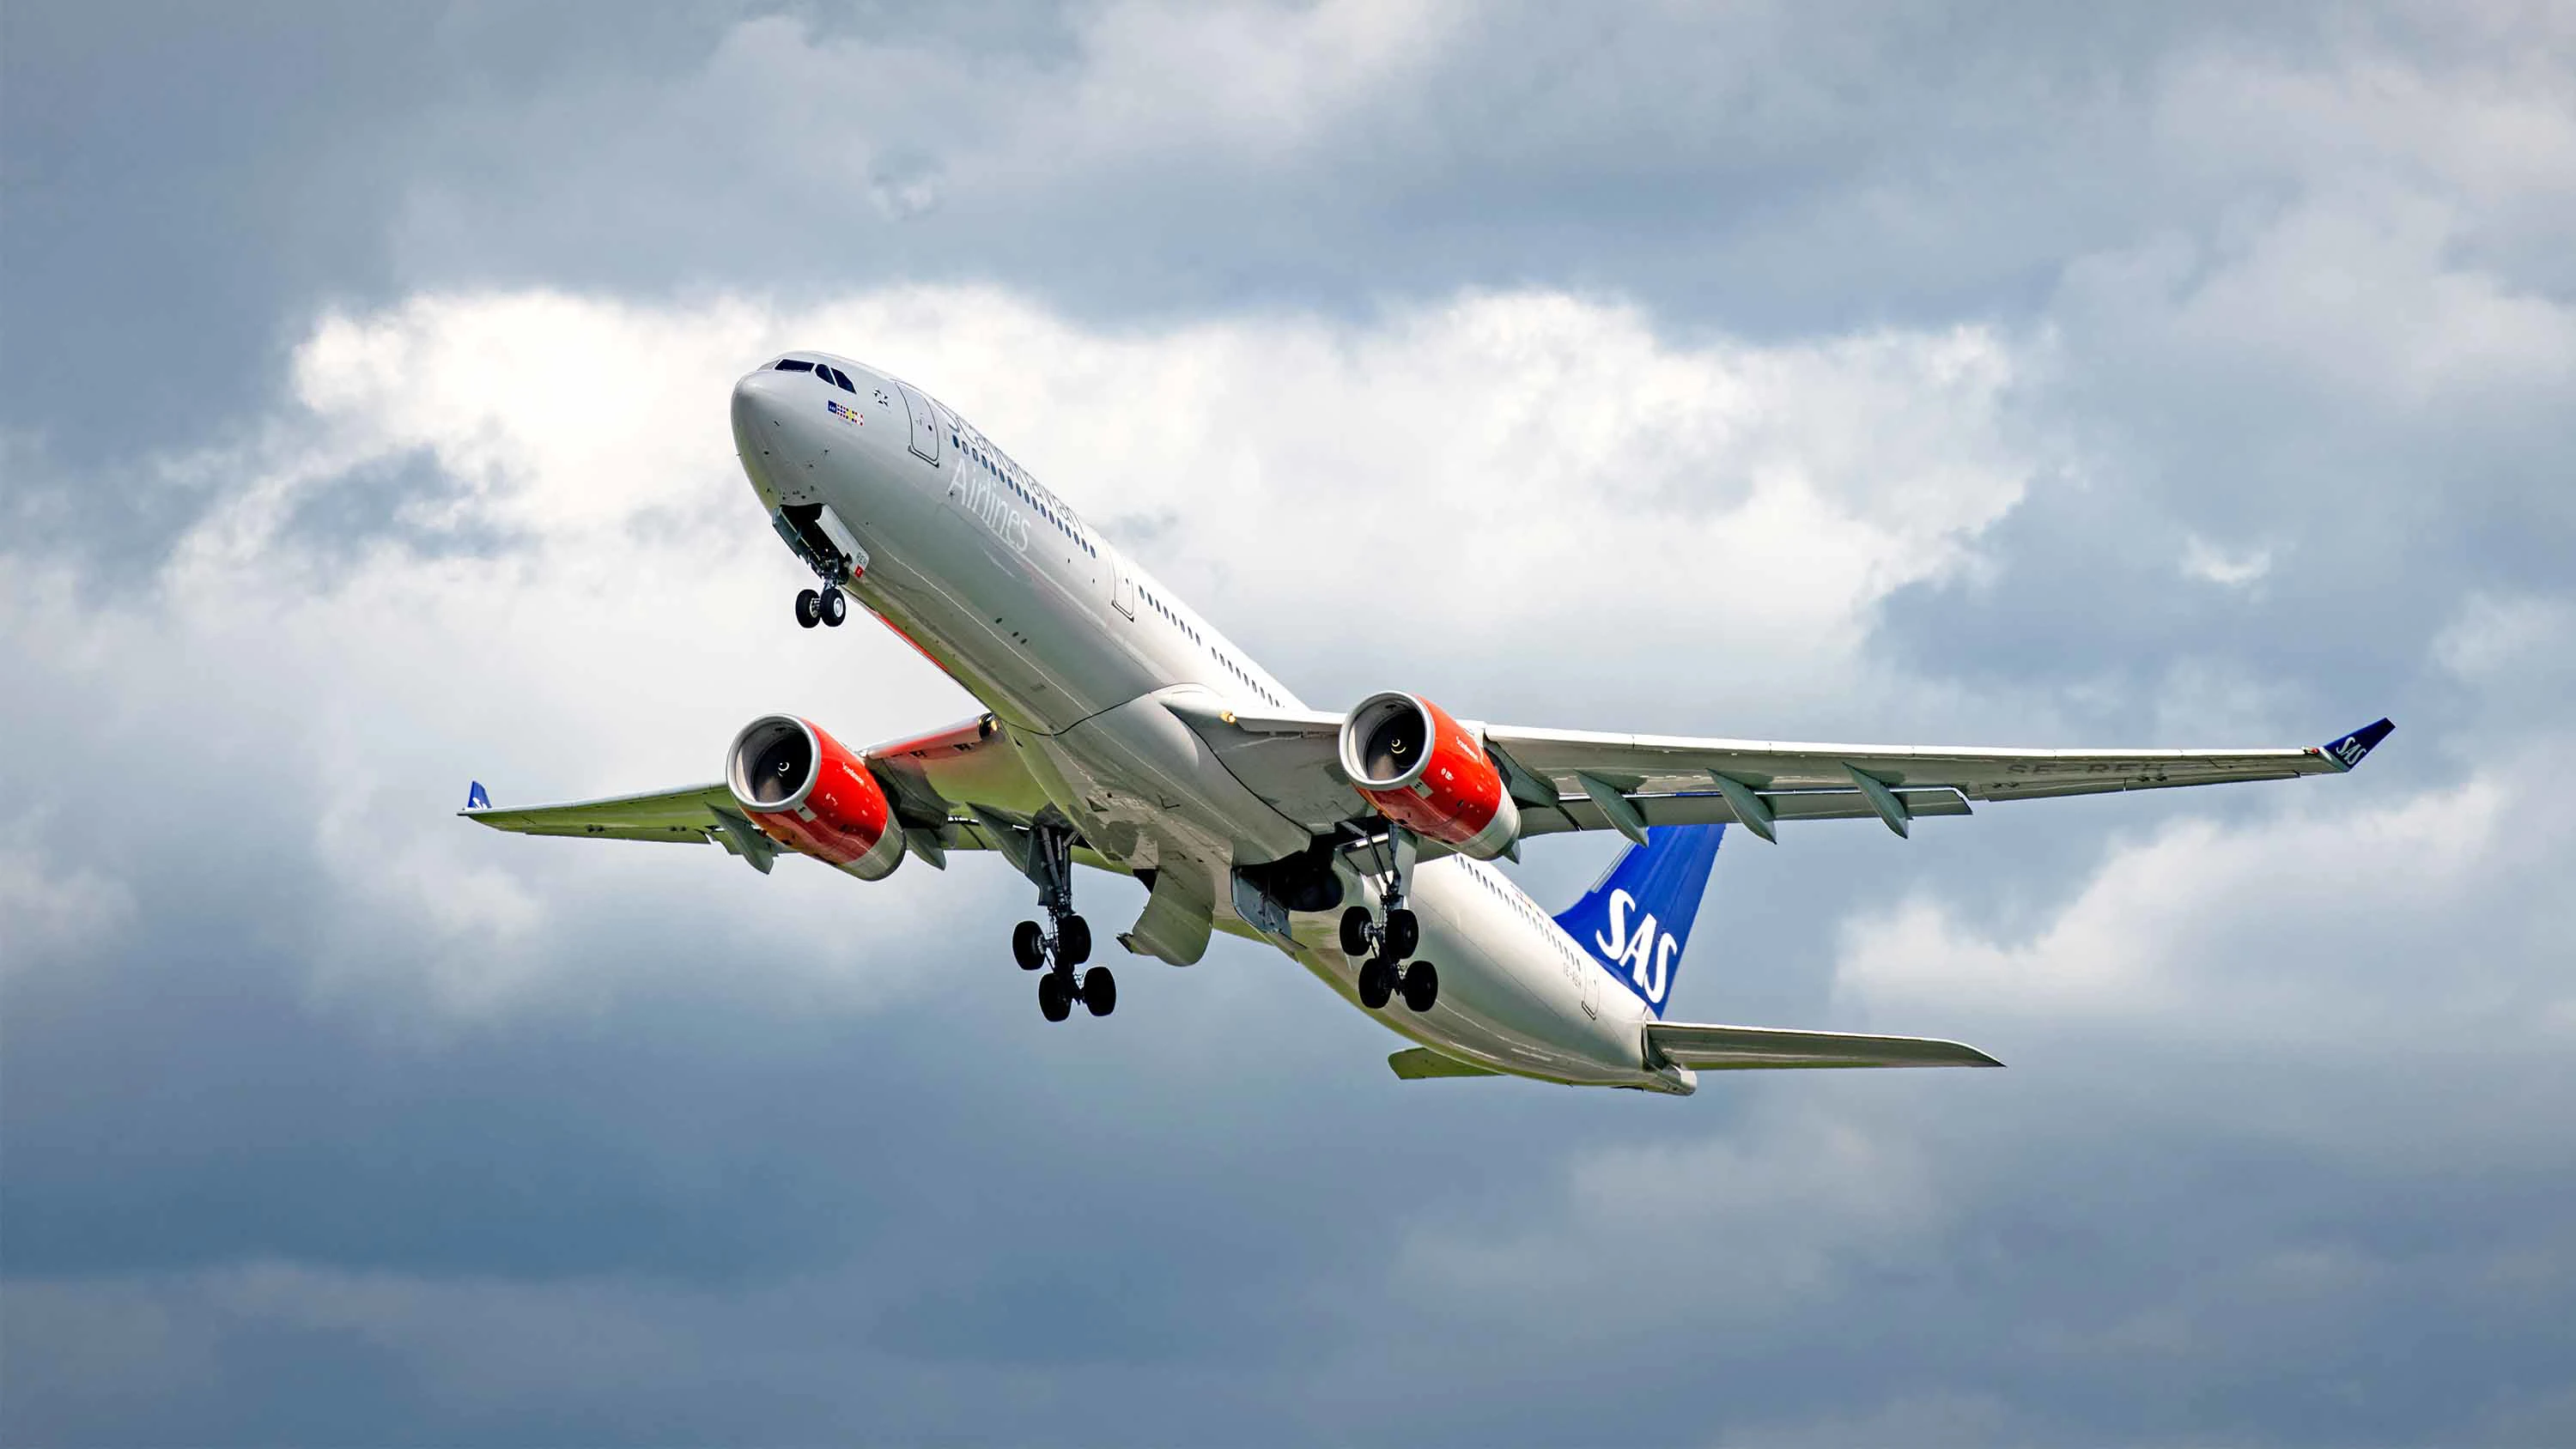 SAS with 5 weekly flights to Miami